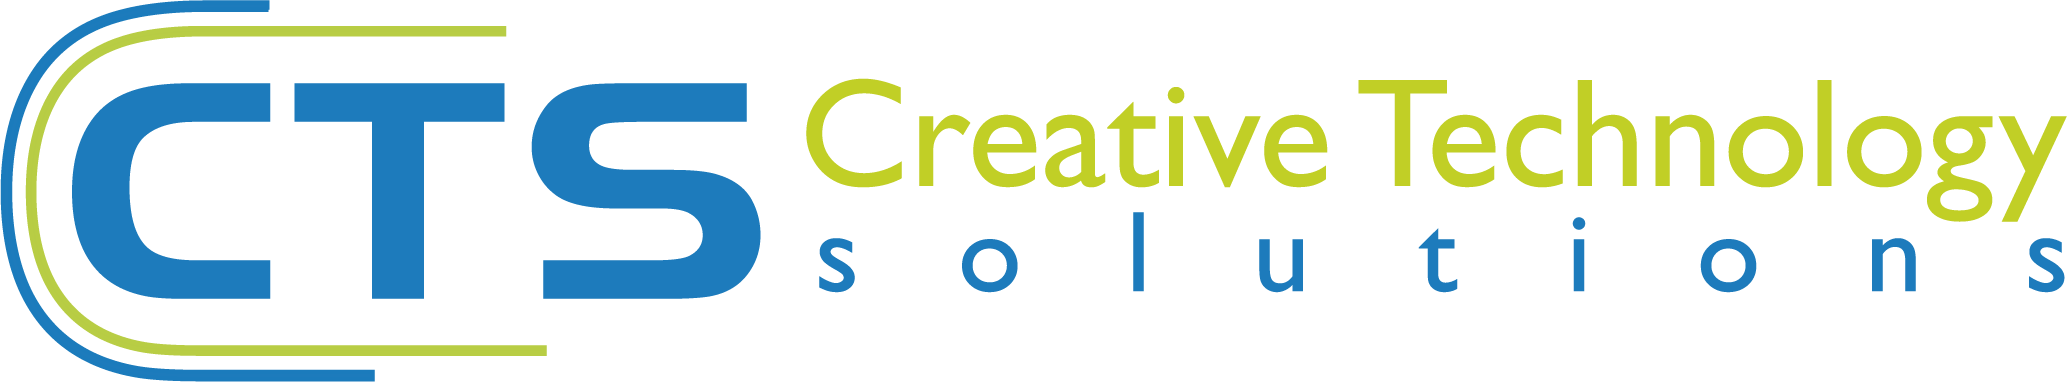 Creative Technology Solutions